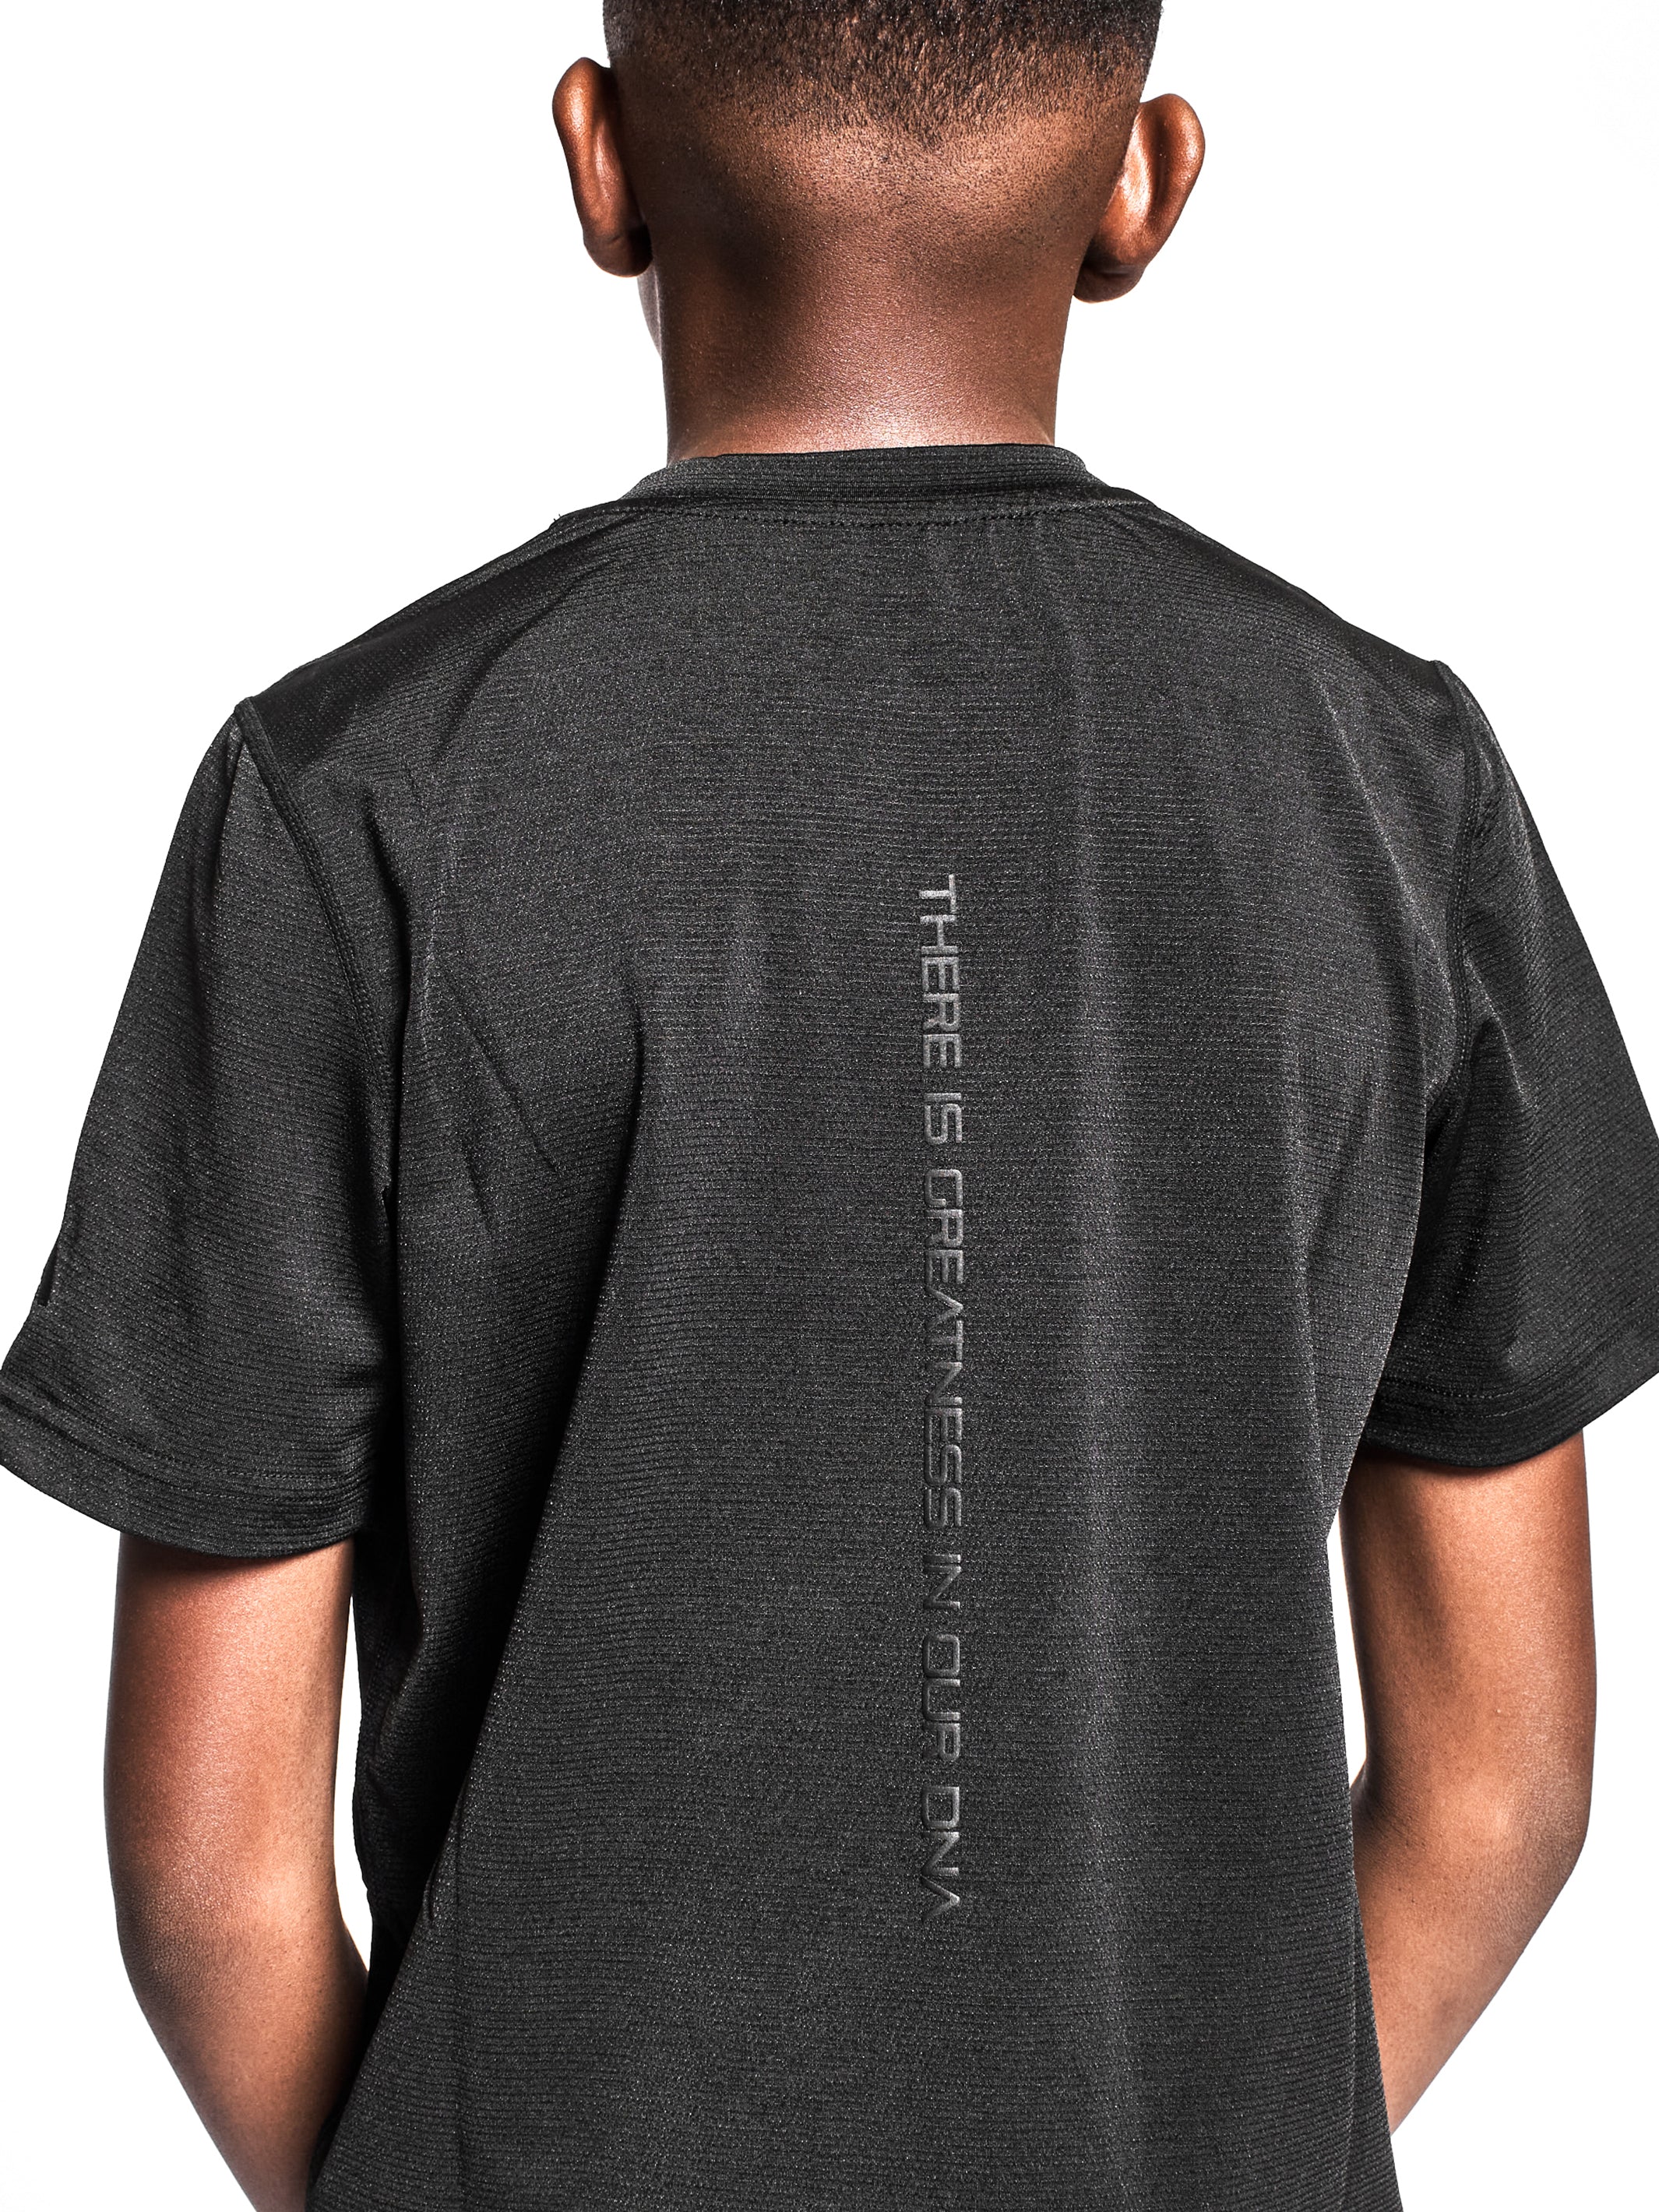 Youth Actively Black Stealth Performance Shirt